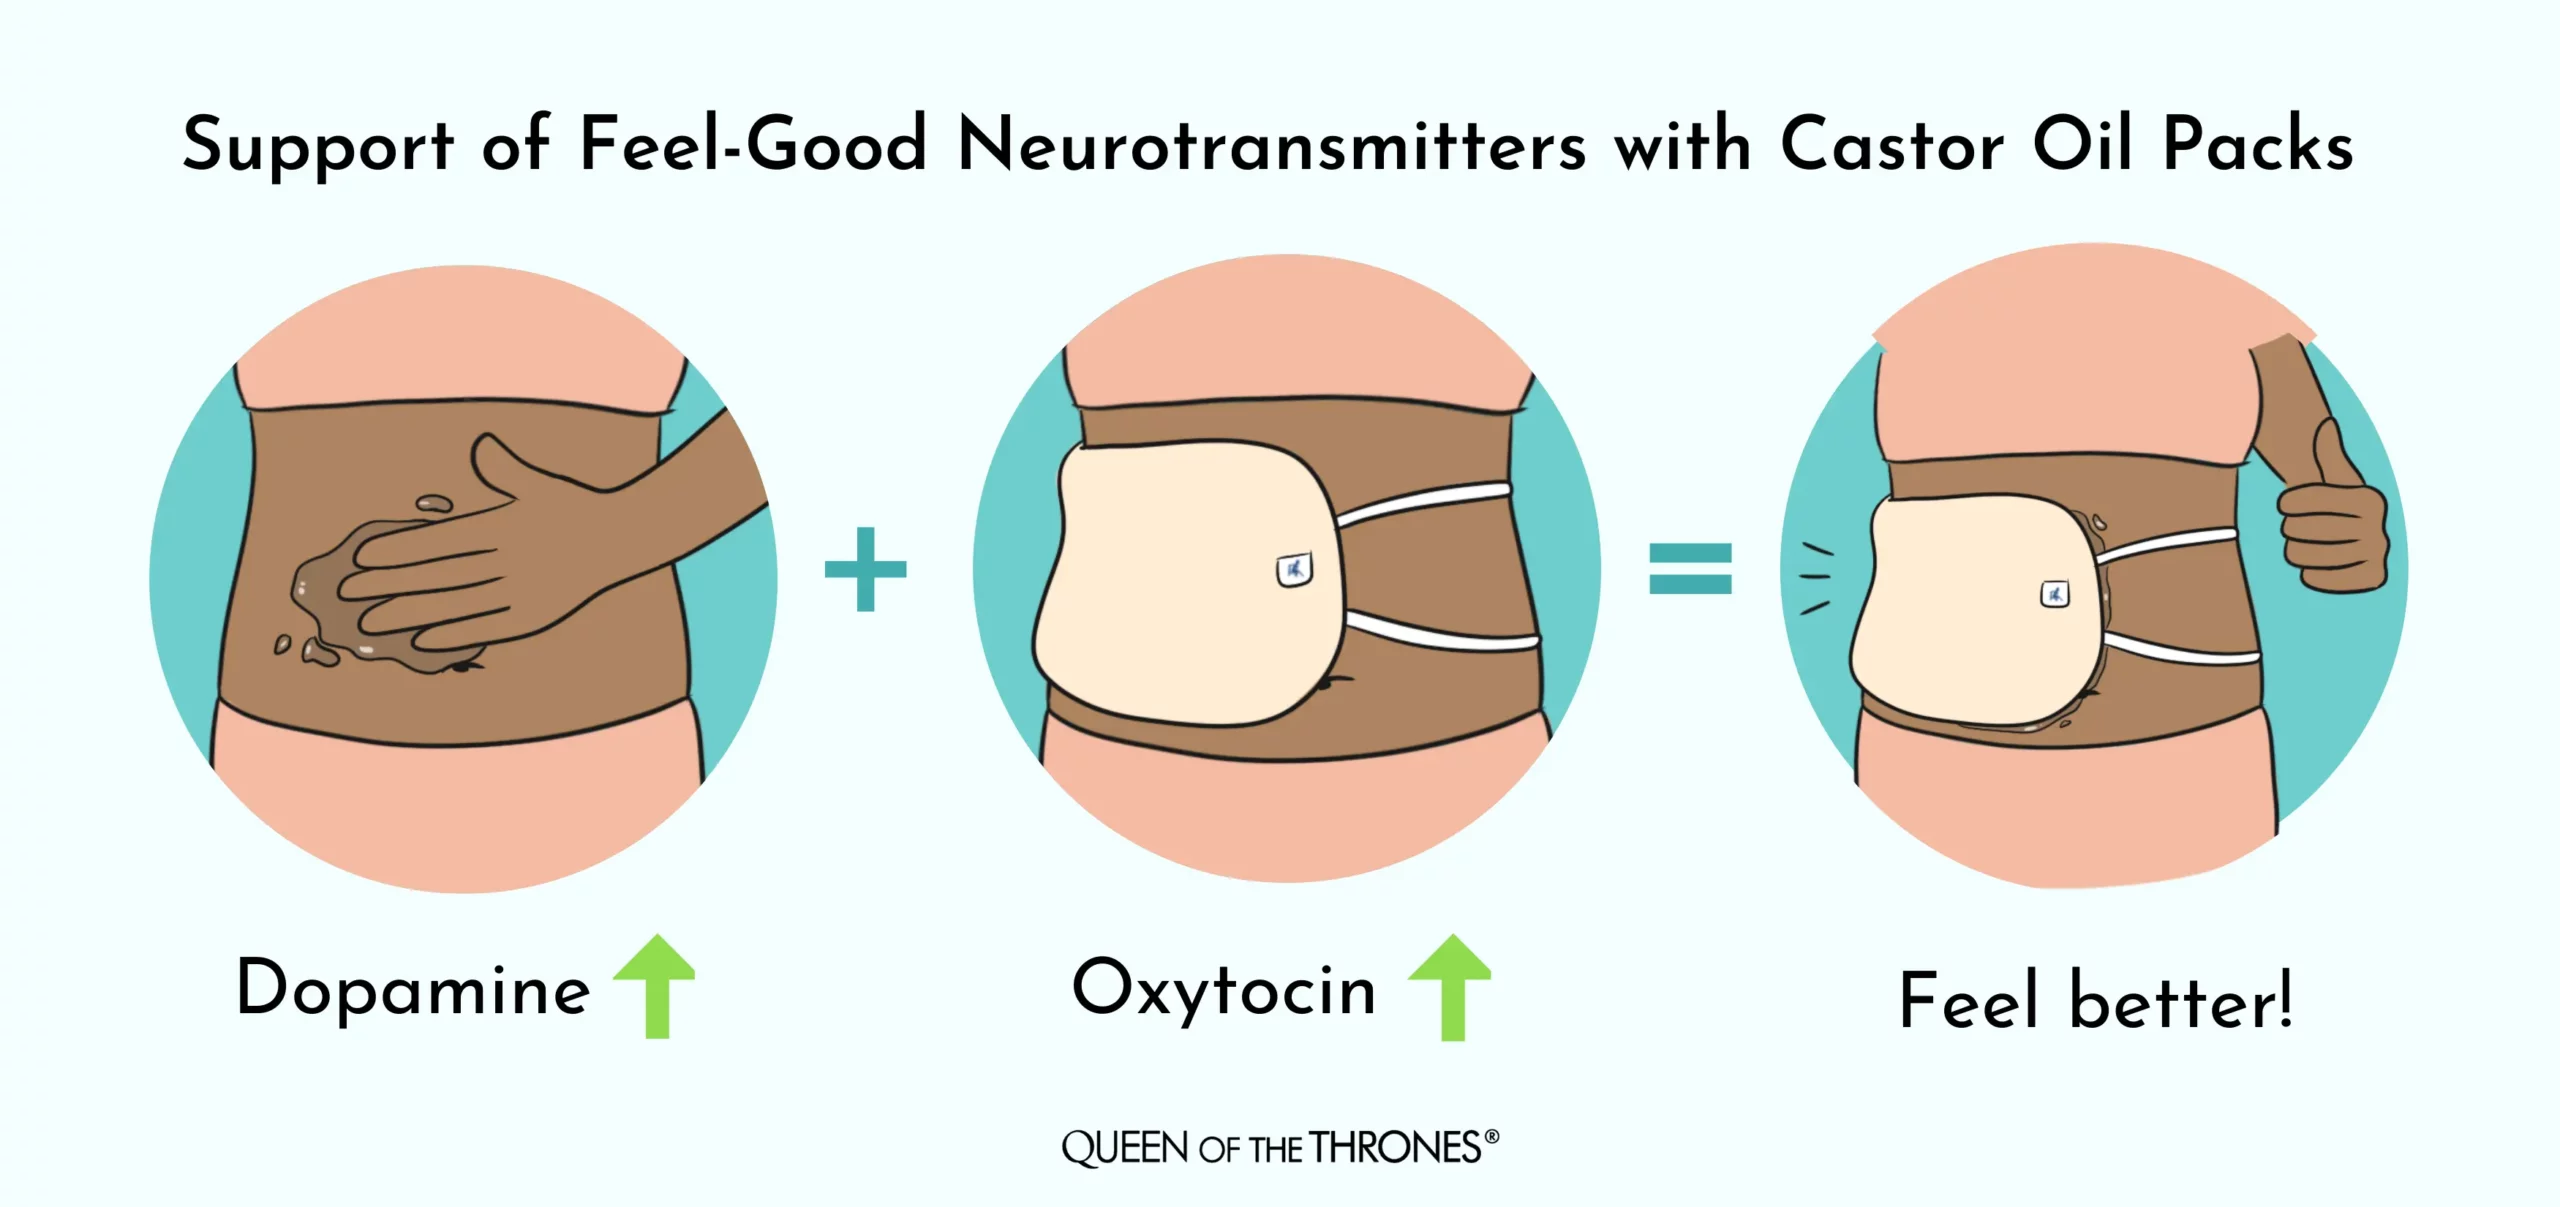 Improve your health and support of Feel Good Neurotransmitters with Queen of the Thrones Castor Oil Packs